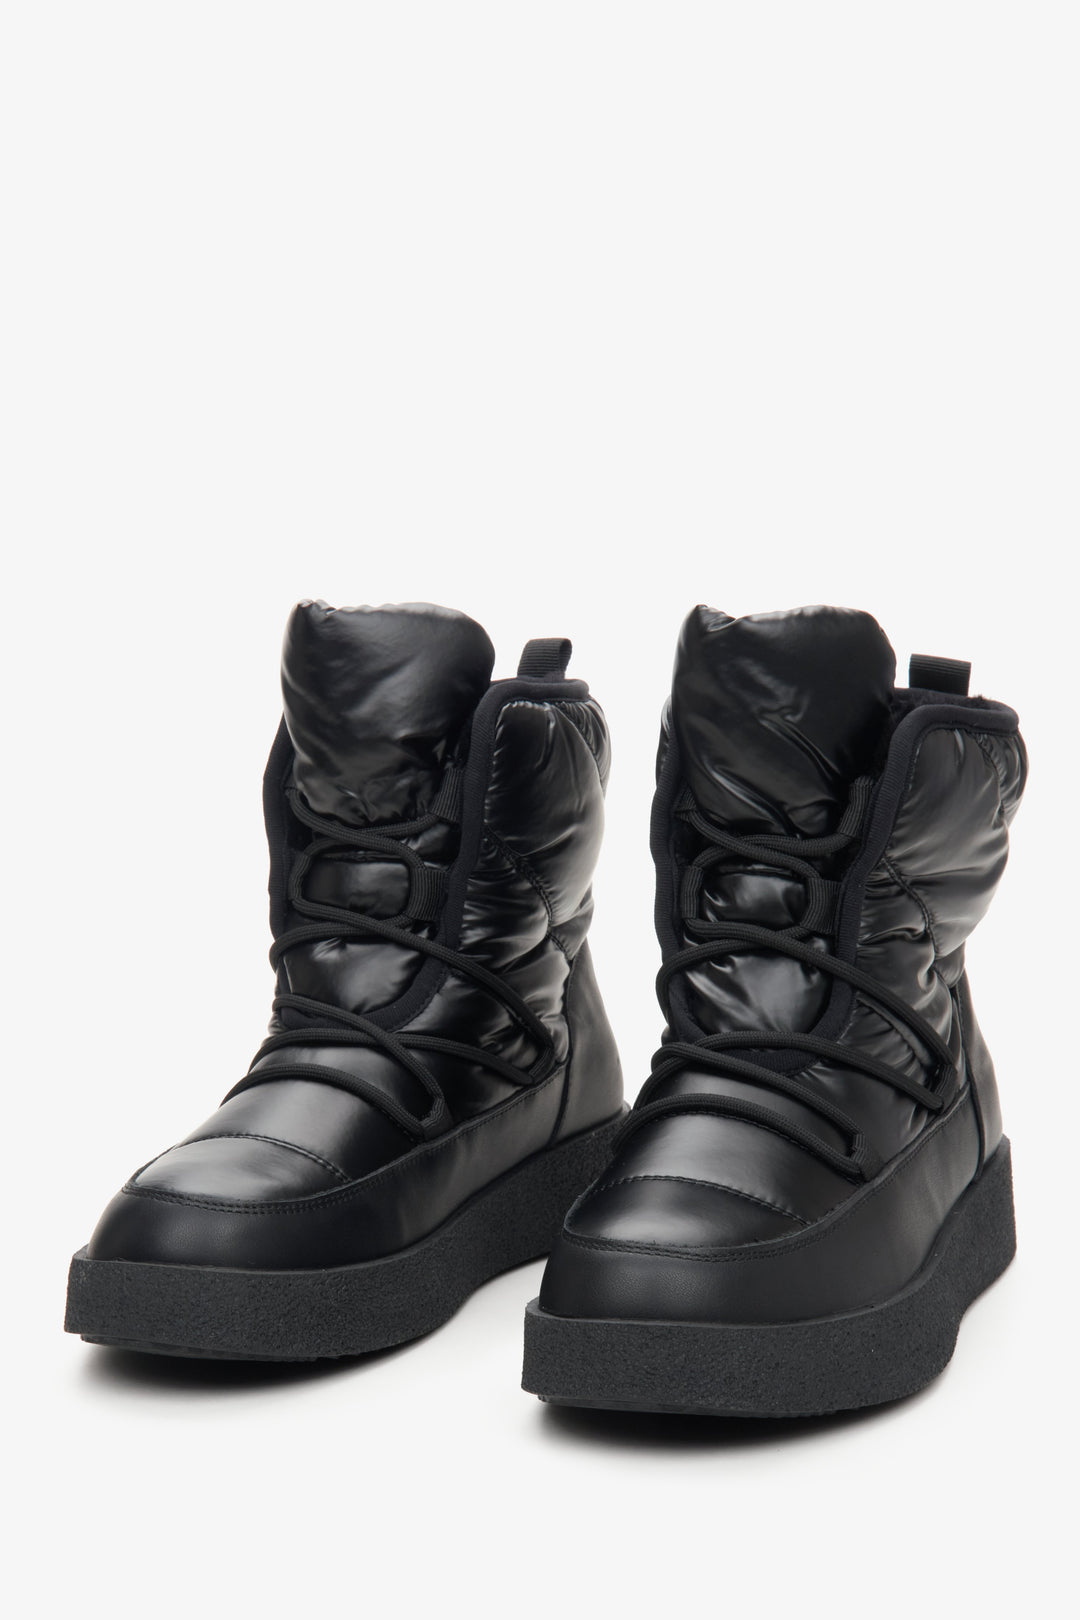 Women's leather black snow boots with a glossy finish by Estro - close-up on the front of the model.